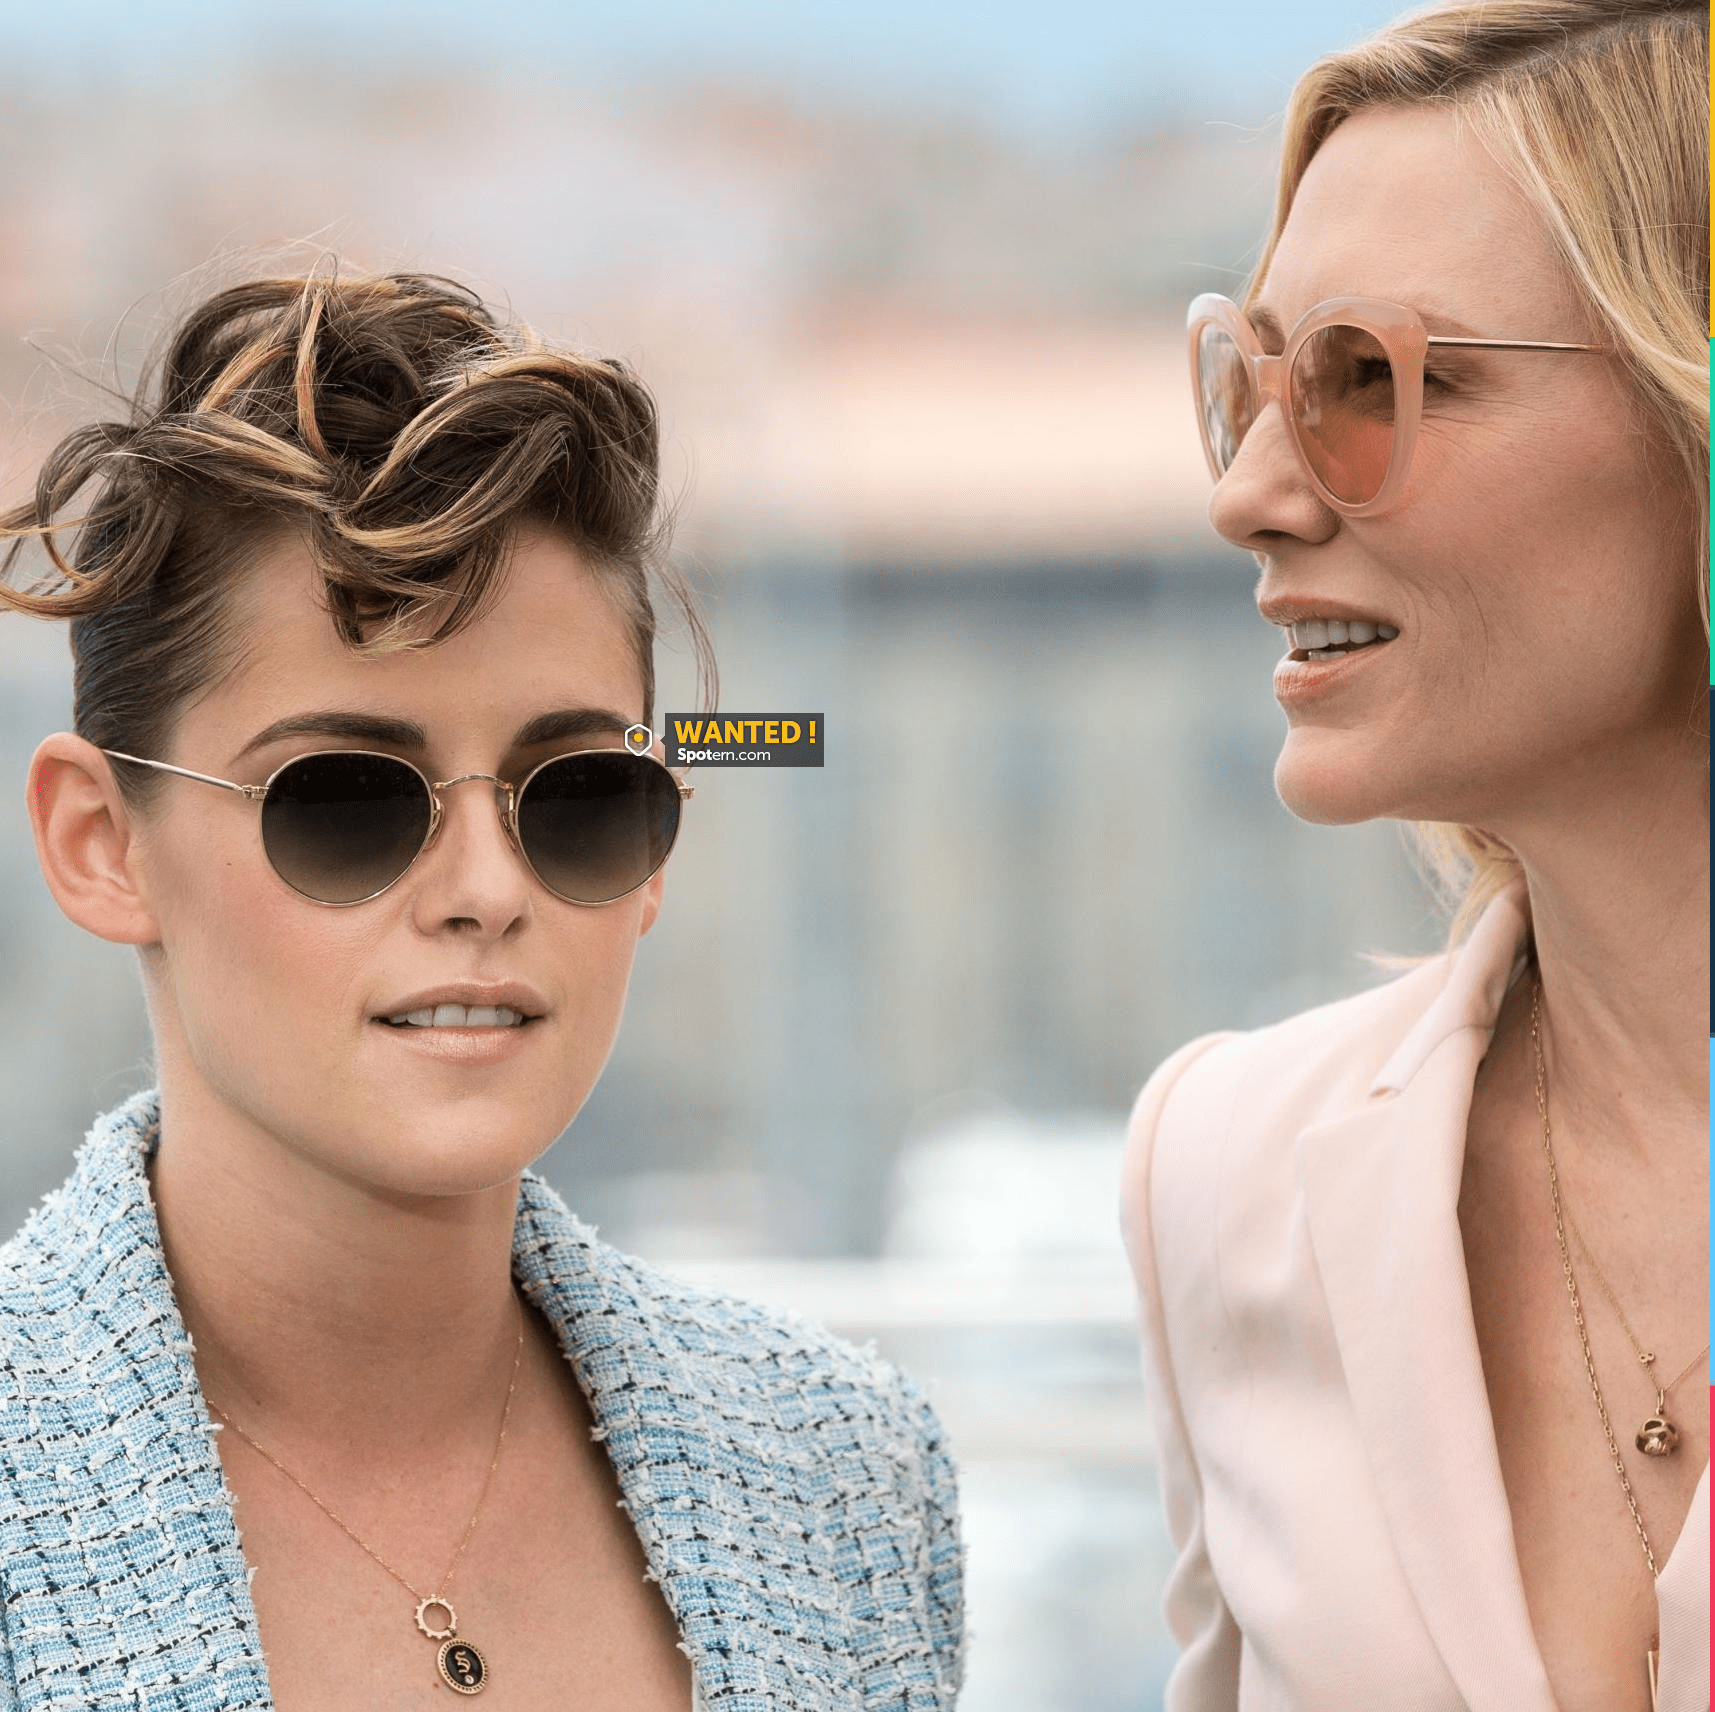 Sunglasses worn by Kristen Stewart during The Cannes film Festival in 2018